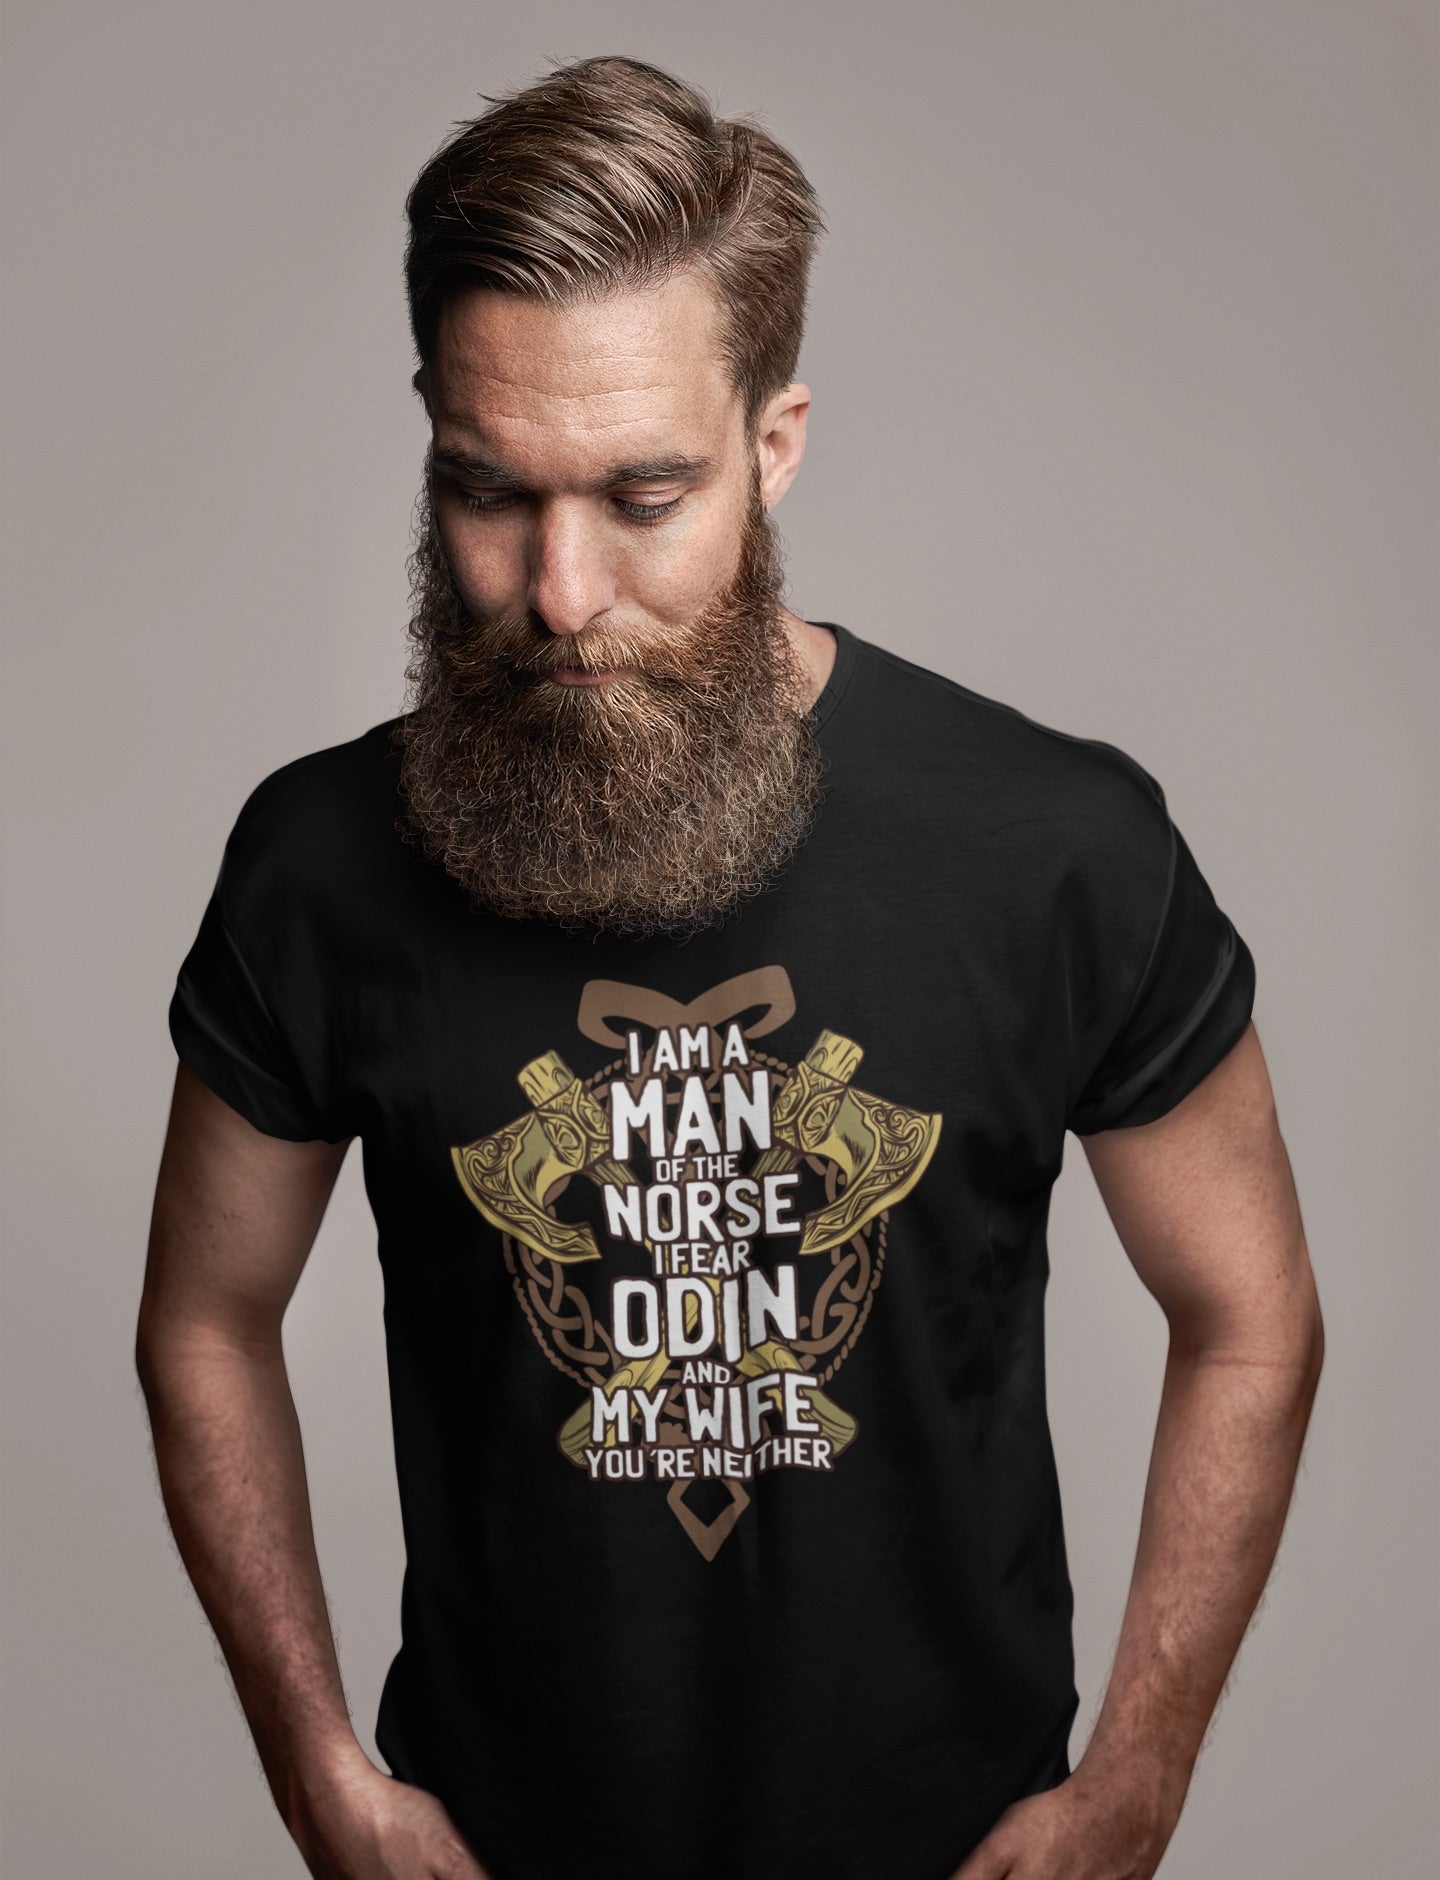 I Fear My Wife and Odin Shirt